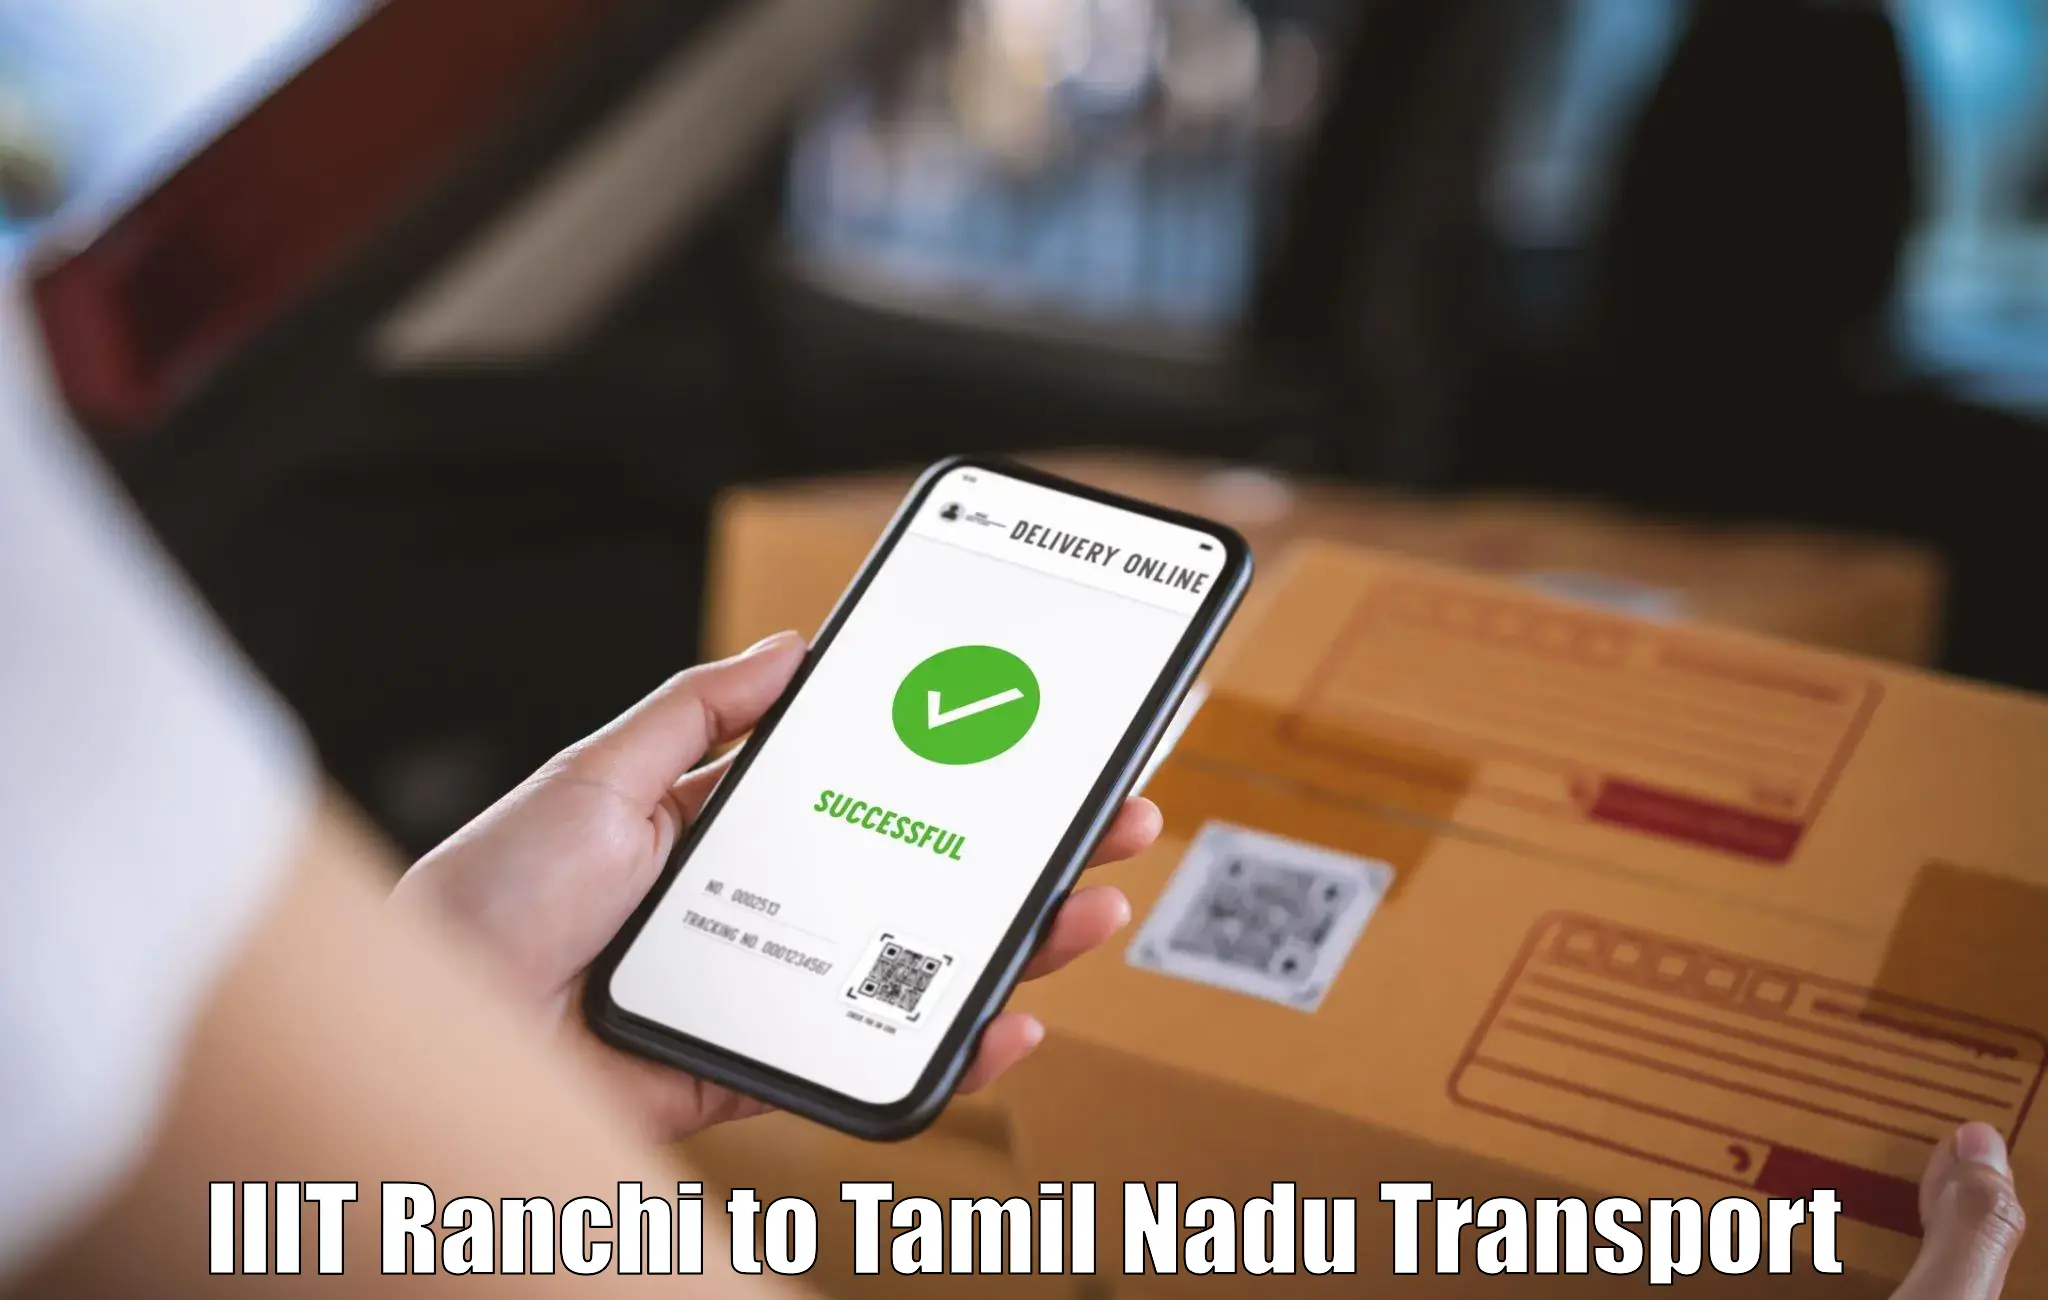 Nationwide transport services IIIT Ranchi to Tamil Nadu